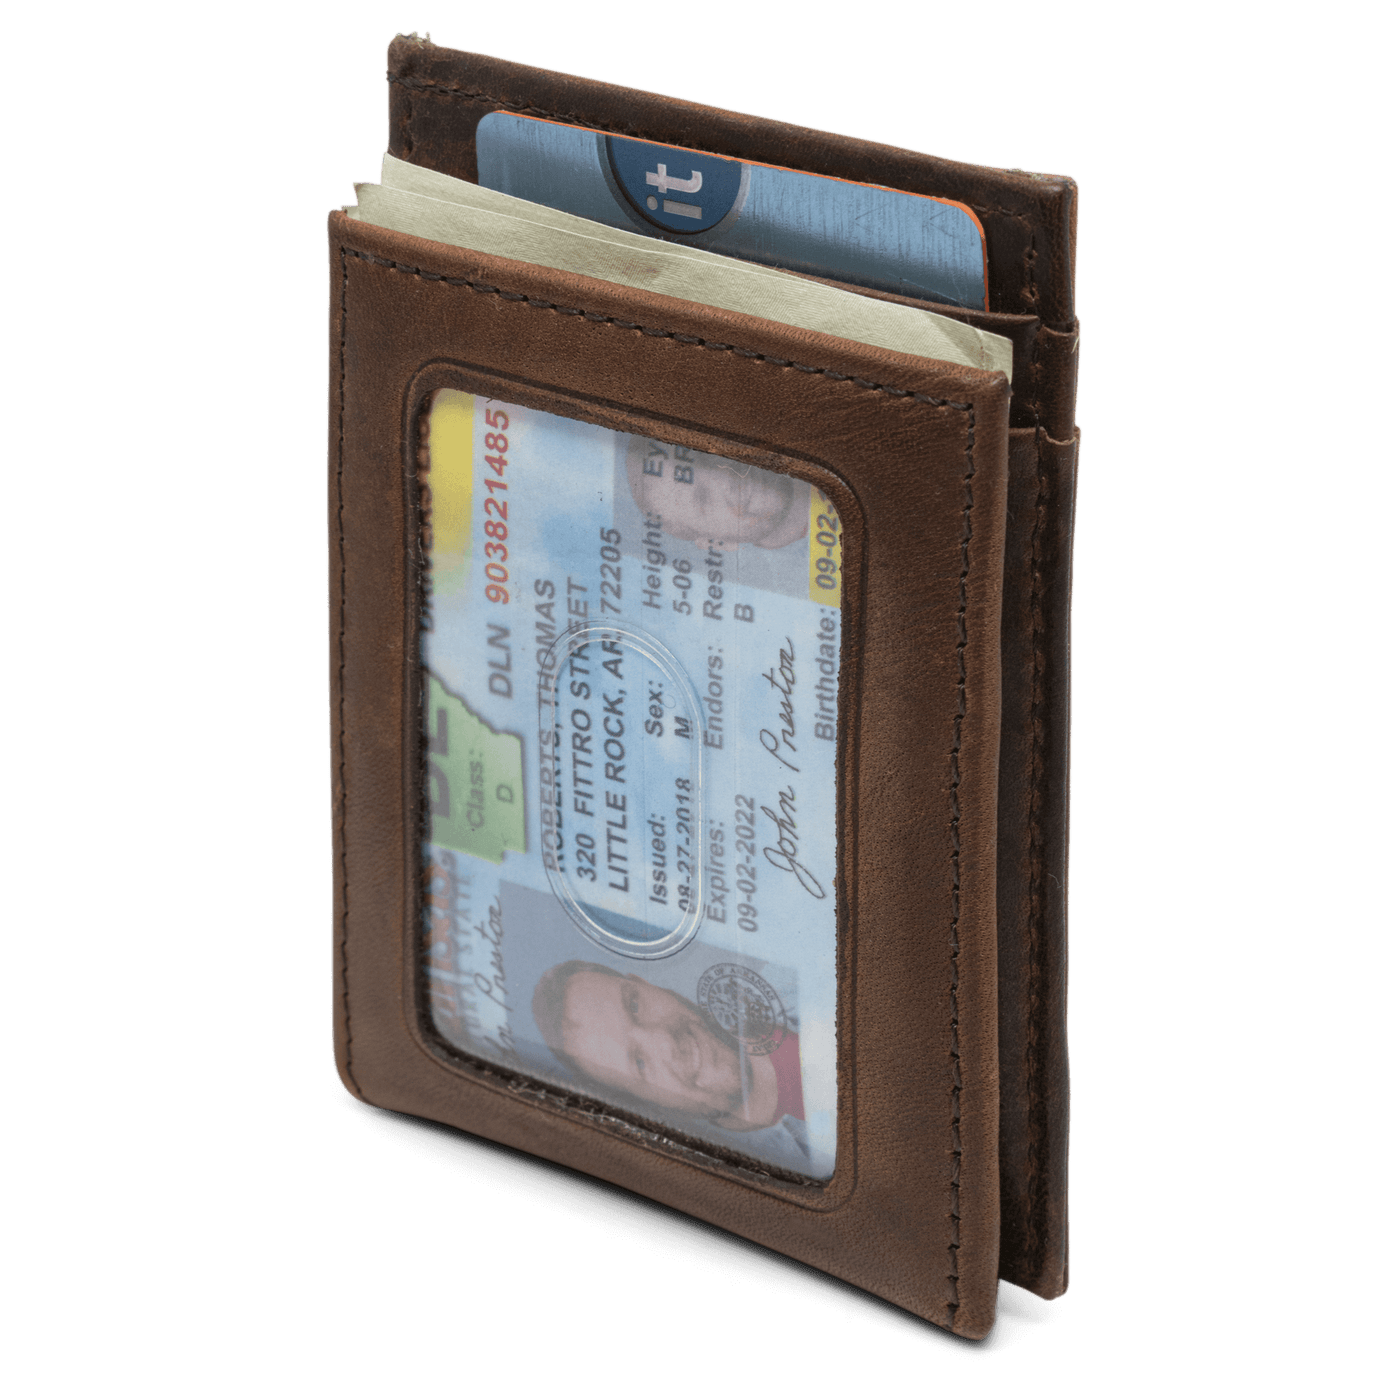 This Dynasty Front Pocket Shotshell Wallet with magnetic clip is created from a premier full grain leather along with a hand-oiled finish and shotshell concho, making it a perfect piece for any outdoor enthusiast. Ensure to get yours today! 4 Card Slots Center Bill Compartment ID Window 2 Exterior Easy Access Pockets Strong Magnetic Money Clip Slim Minimalist Design Weber’s Signature Shotshell Concho Magnetic Clip Holds: 10+ Bills Dimensions: 4"L x 2.75"H RFID Protection Color: Brown